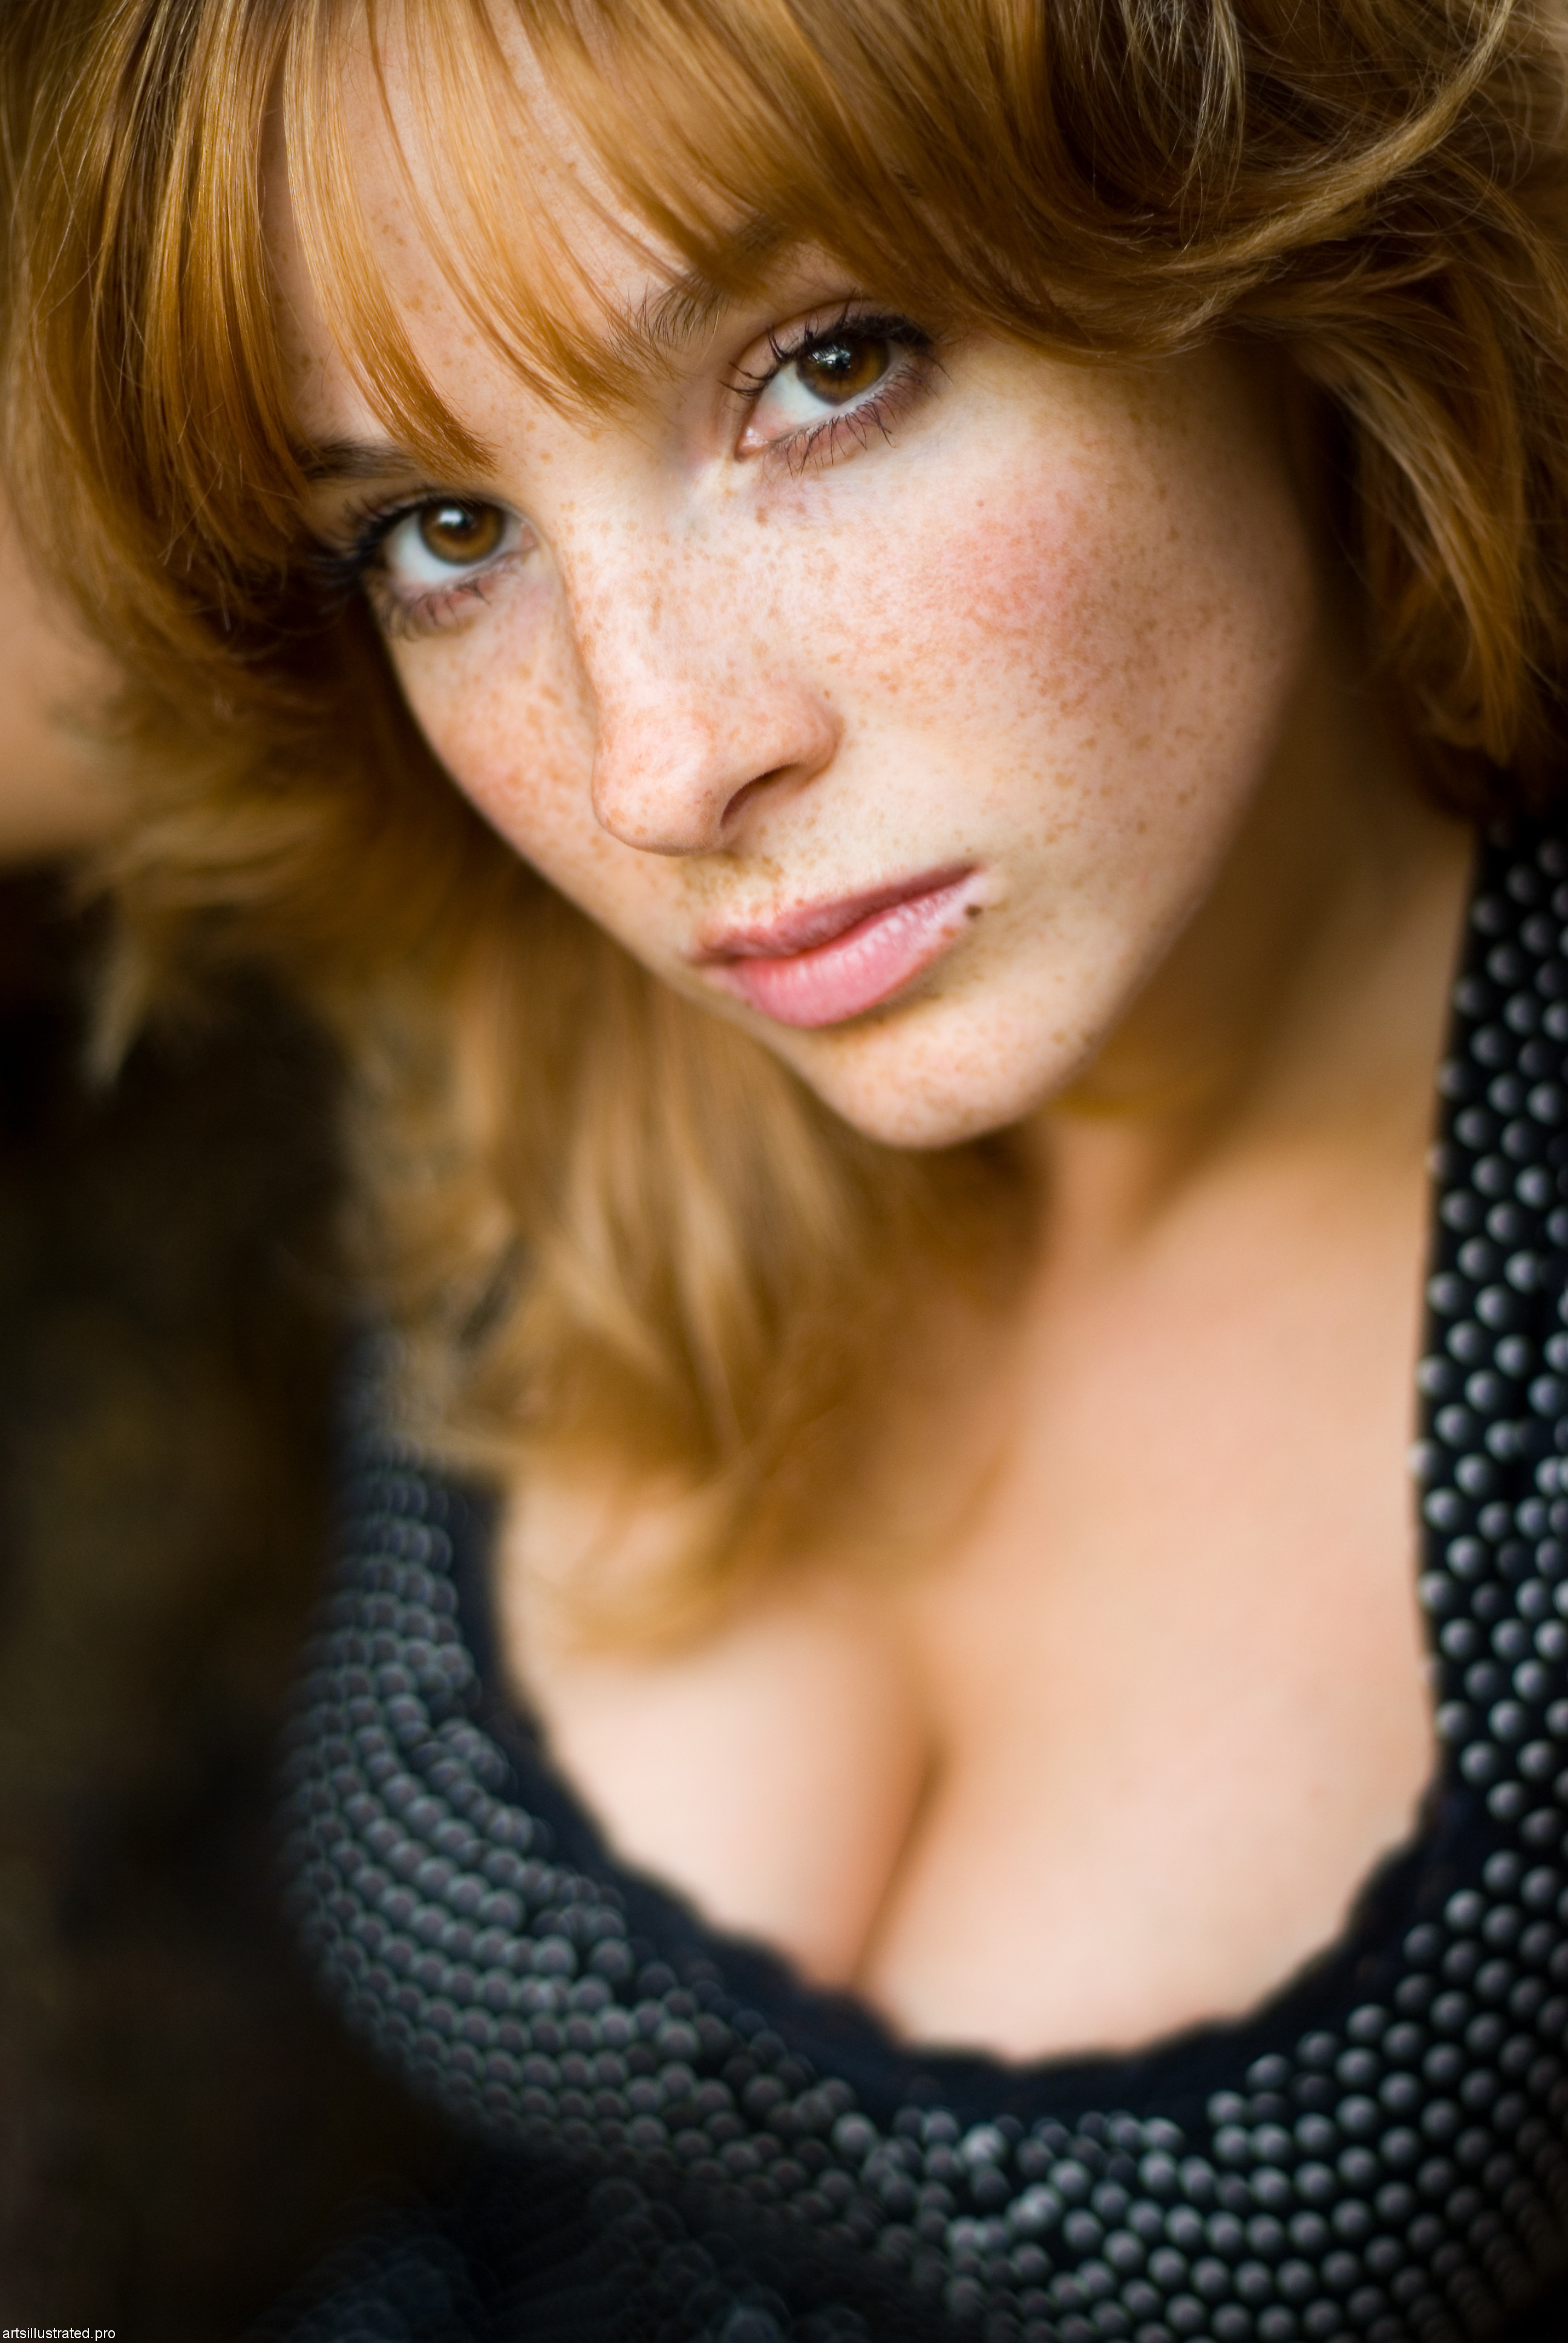 Vica Kerekes wallpapers for iPhone, Android.